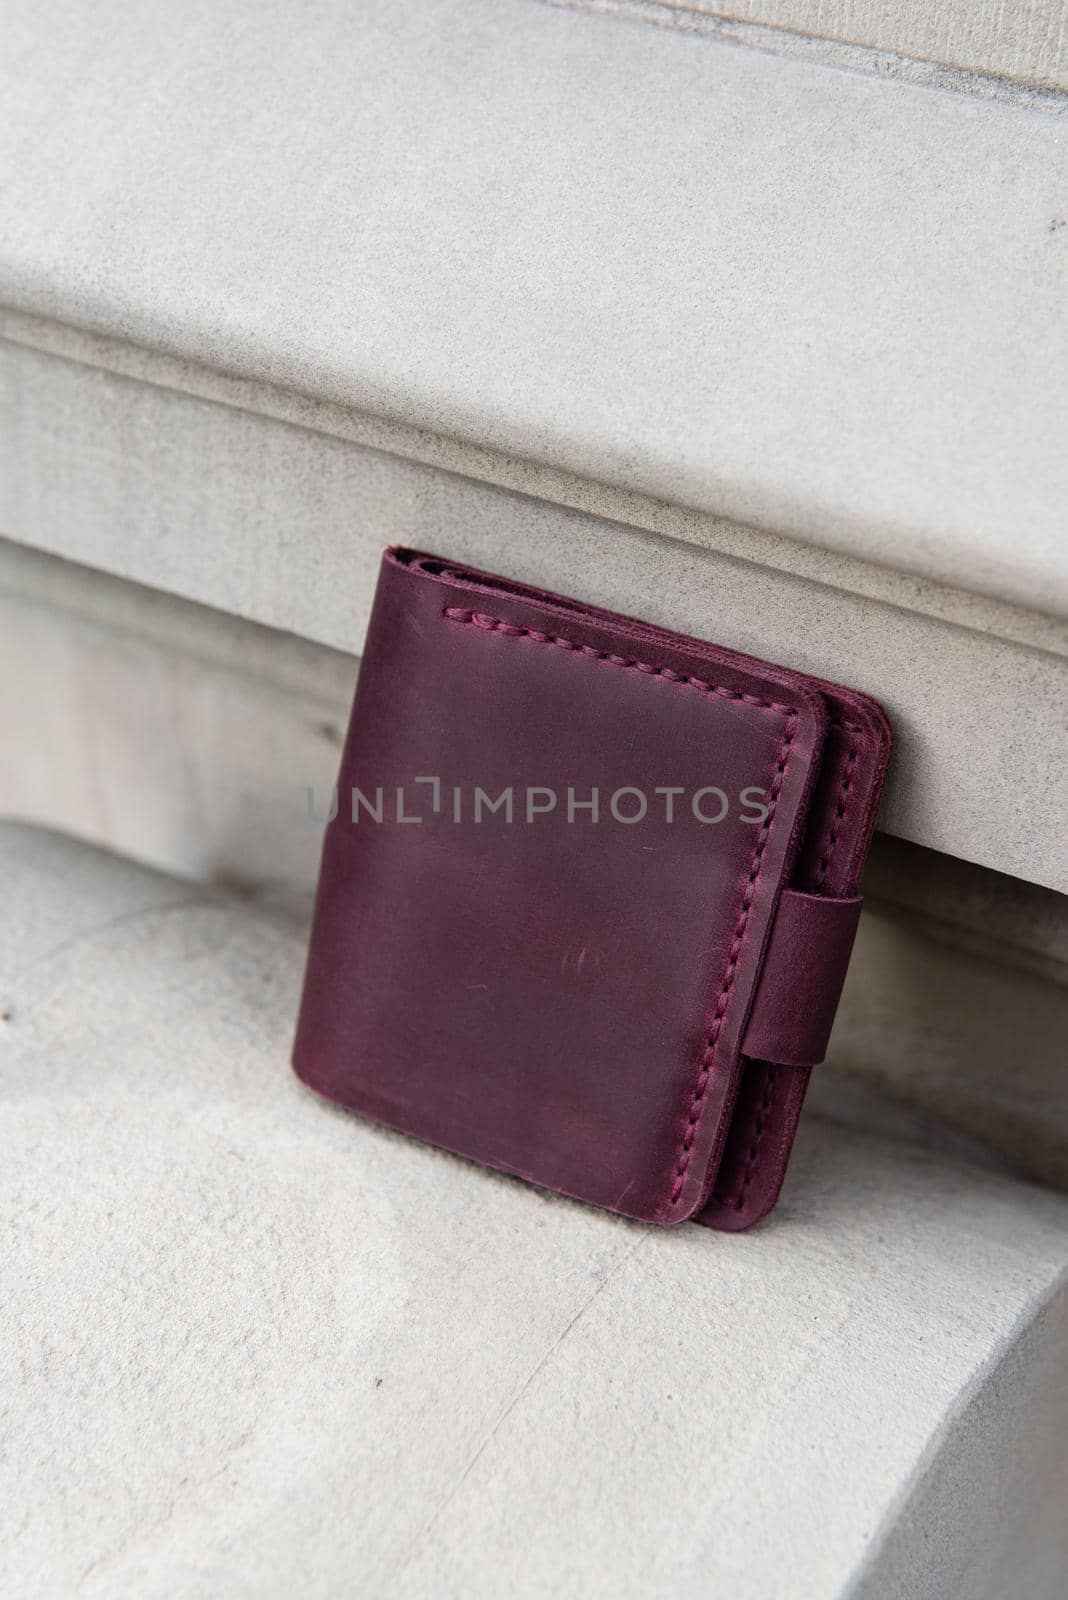 hand made leather wallet . Leather craft. Selective focus by Ashtray25